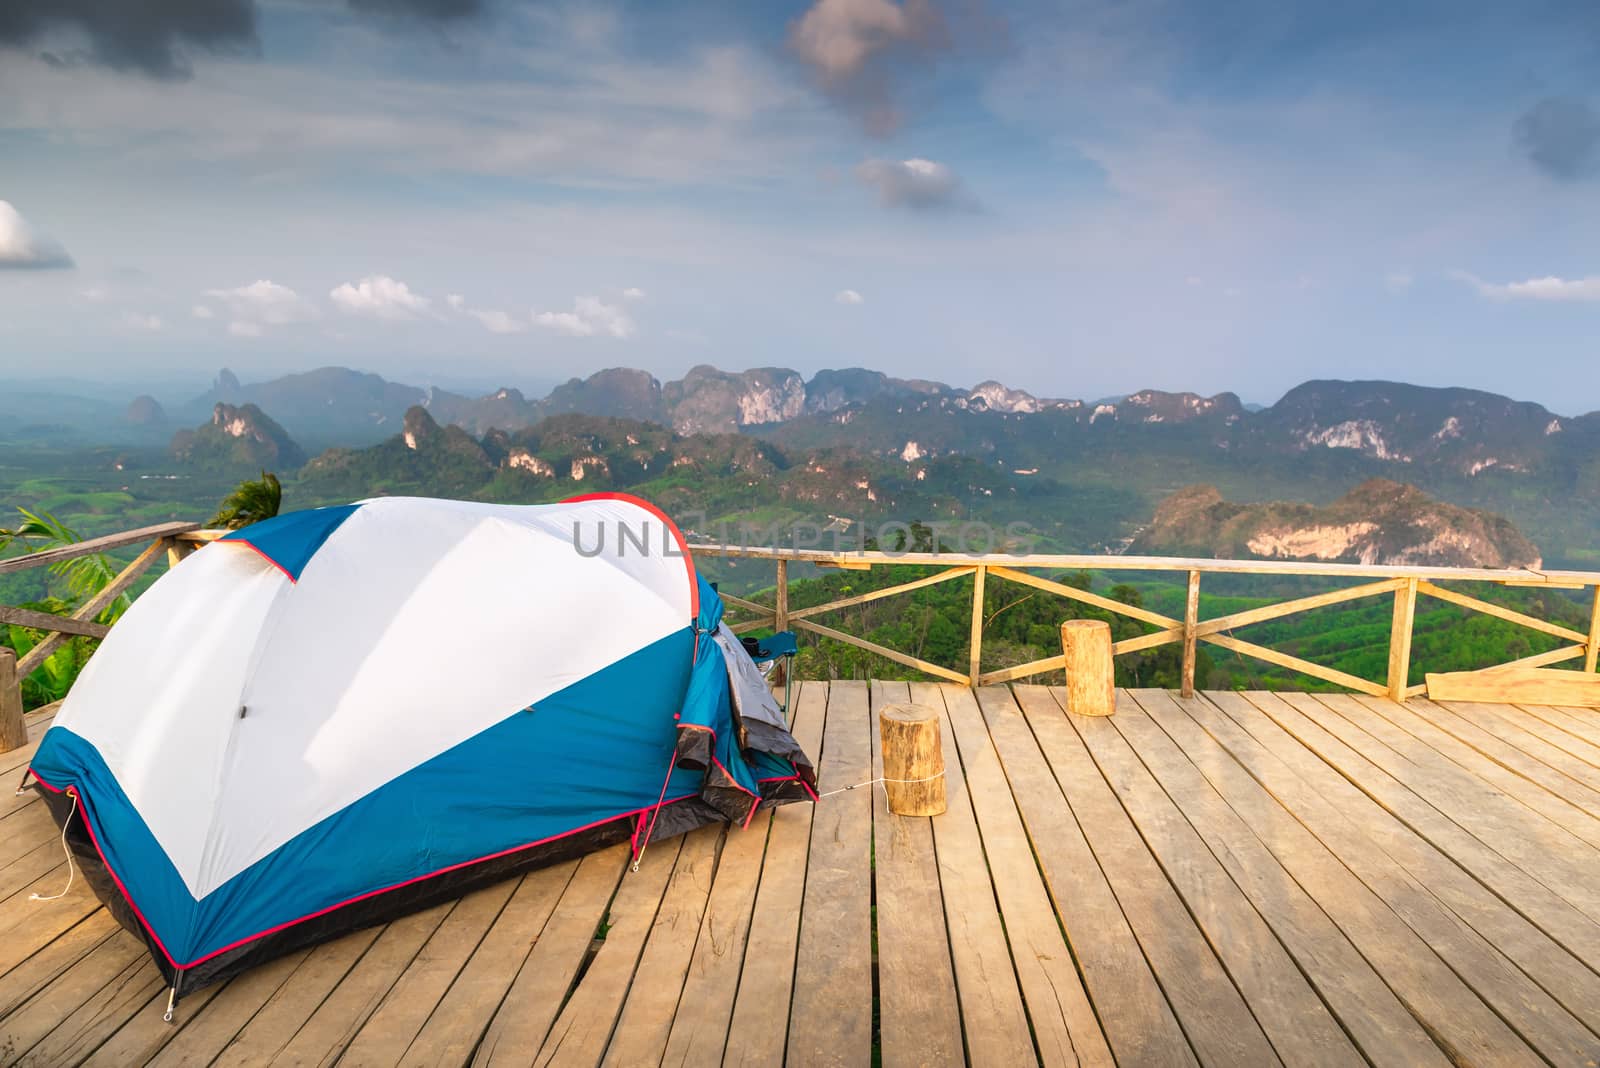 Landscape Scenery Mountains View With Camping Tent on Wooden Terrace for Outdoors Leisure Activity Relaxation. Beautiful Scenic of Nature From Campsite Viewpoint, Adventure/Vacation Lifestyle Concept. by MahaHeang245789